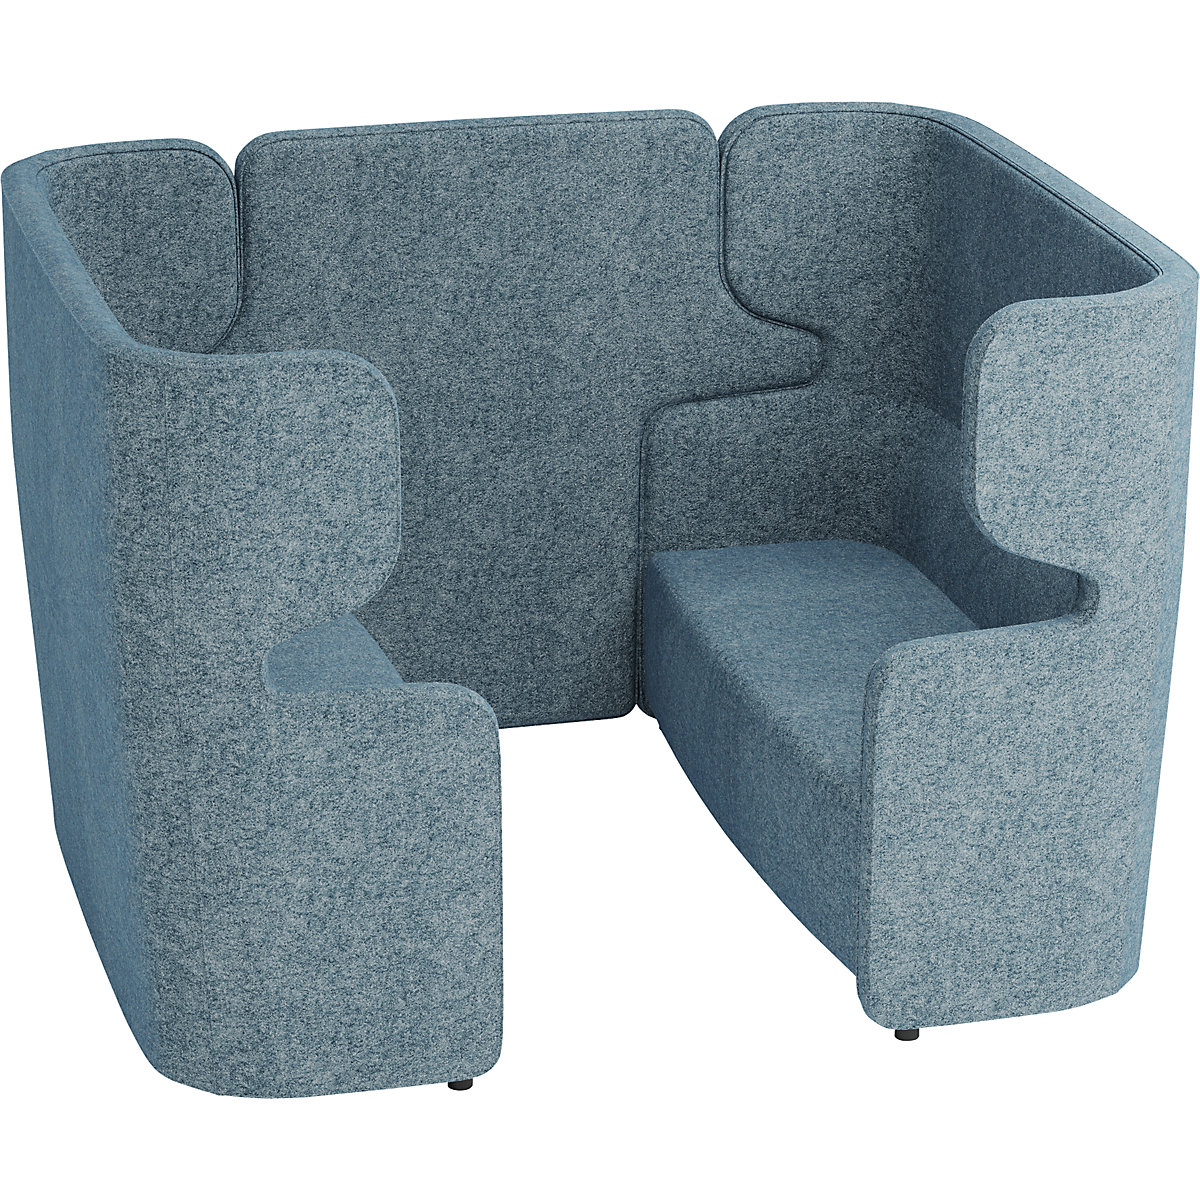 VIVO acoustic sofa – BISLEY, 2 two-seaters with high back rest, centre divider, light blue